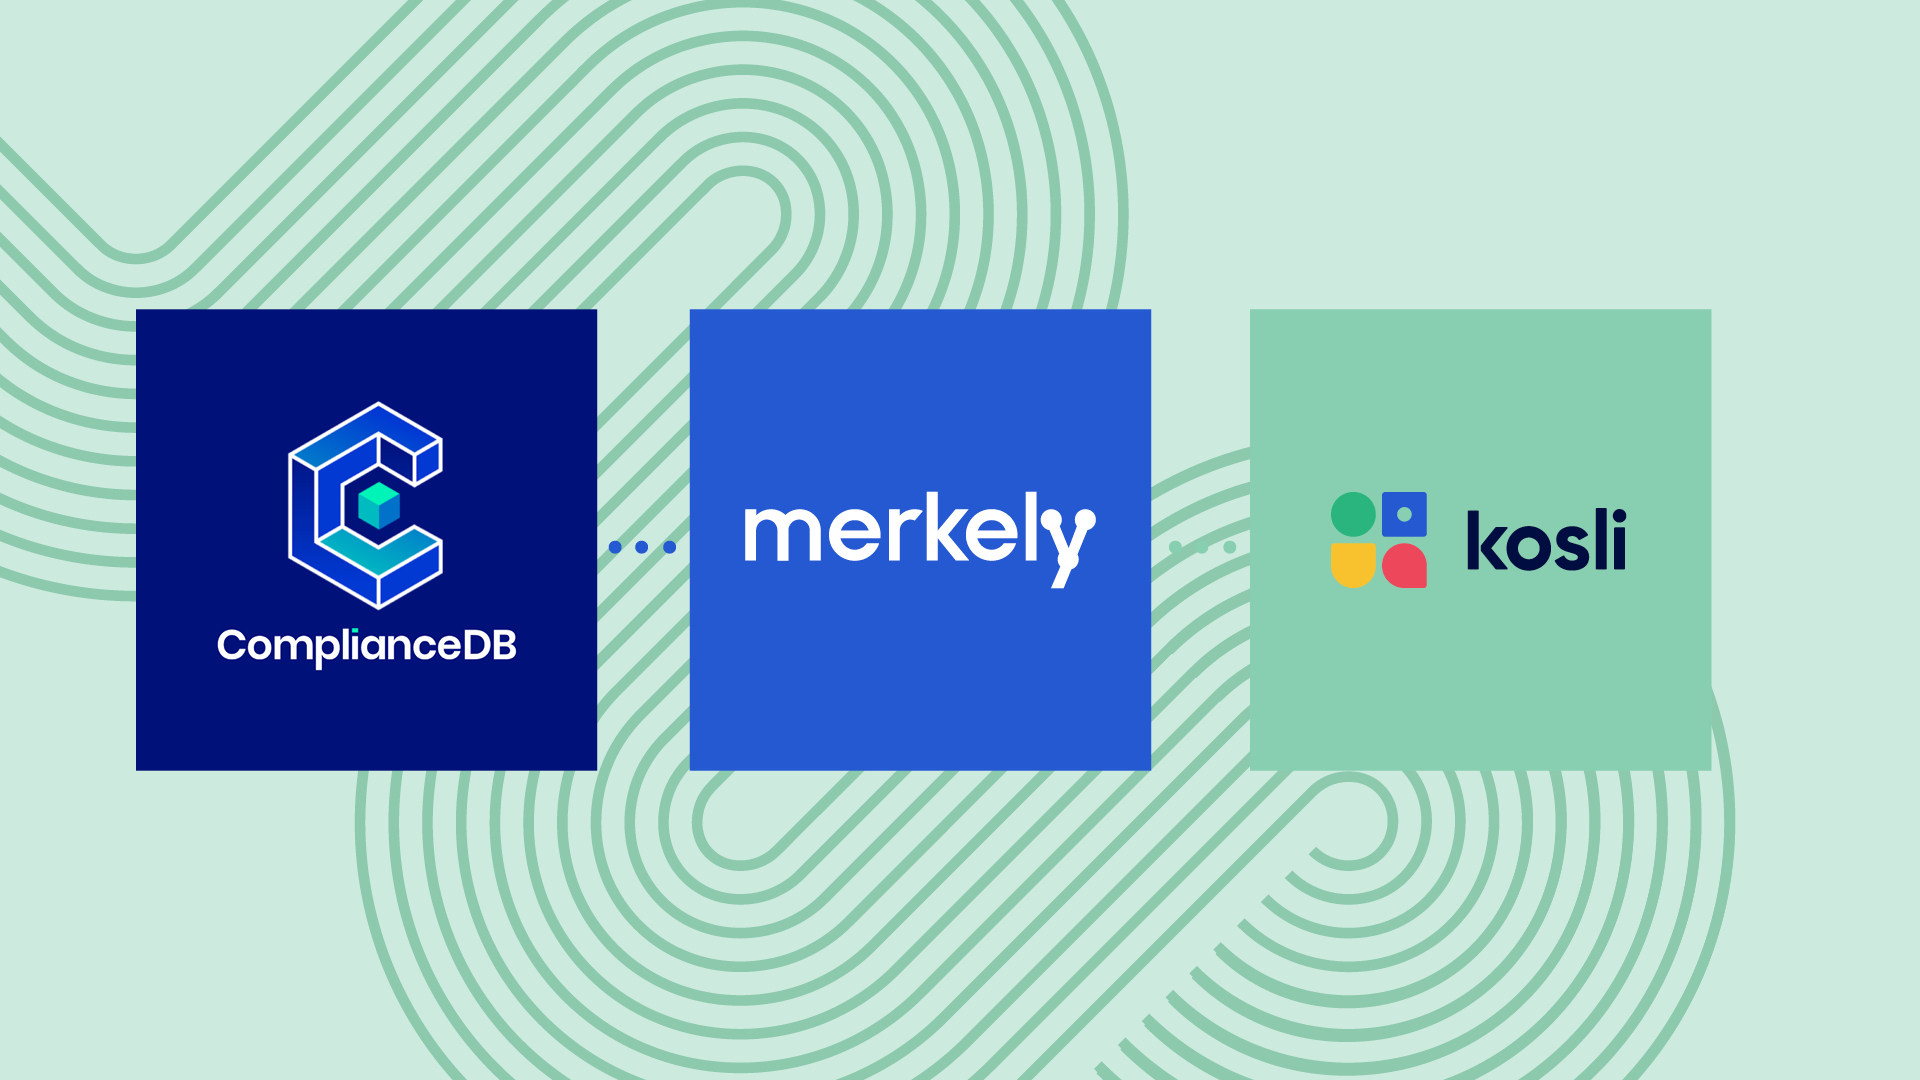 The old ComplianceDB logo and name changed to Merkely in 2021